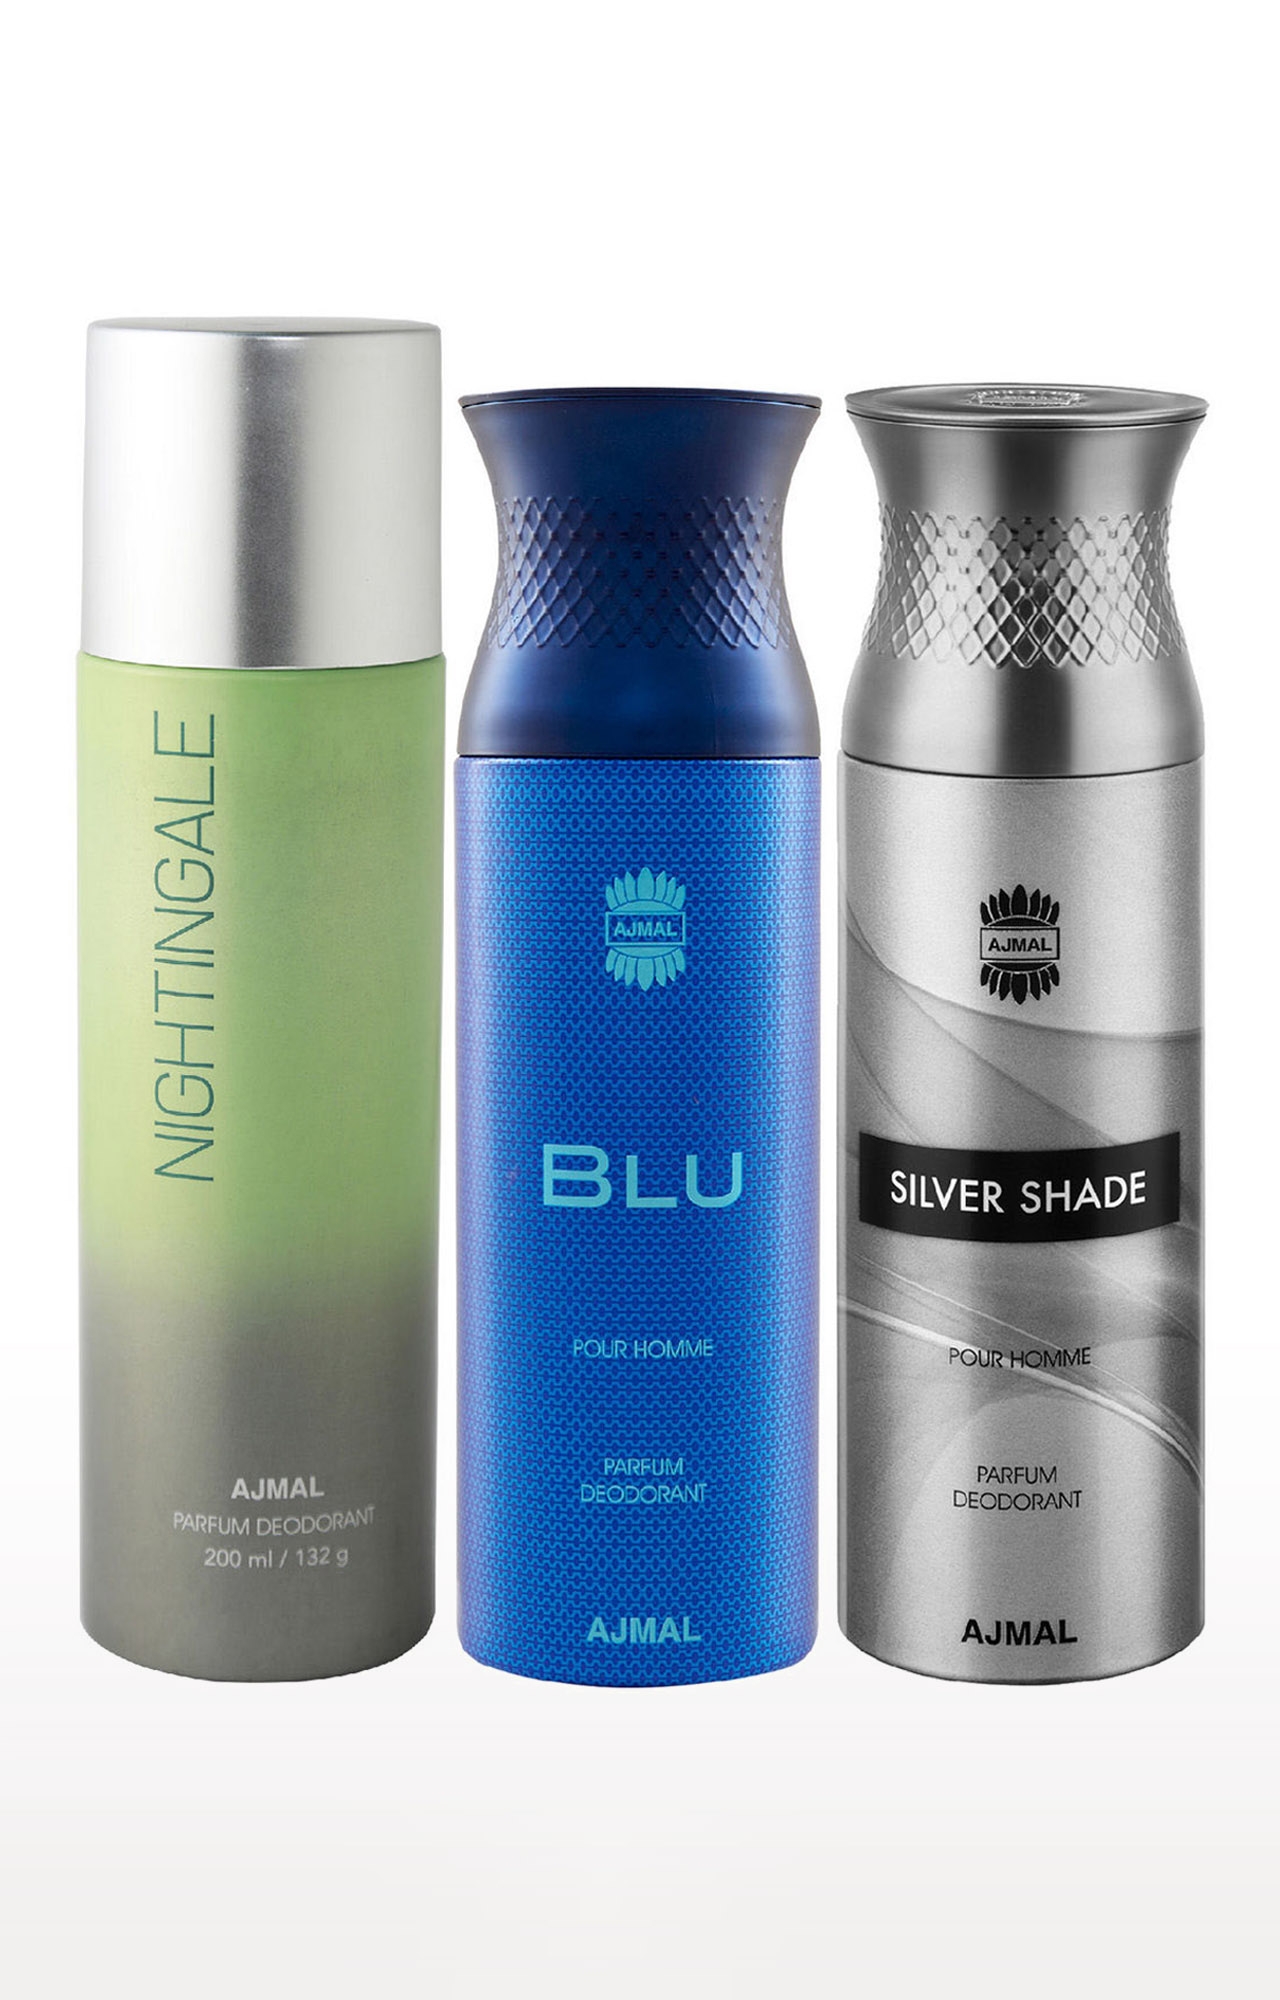 Ajmal 1 Nightingale for Men & Women, 1 Blu Homme for Men and 1 Silver Shade for Men High Quality Deodorants each 200ML Combo pack of 3 (Total 600ML) 